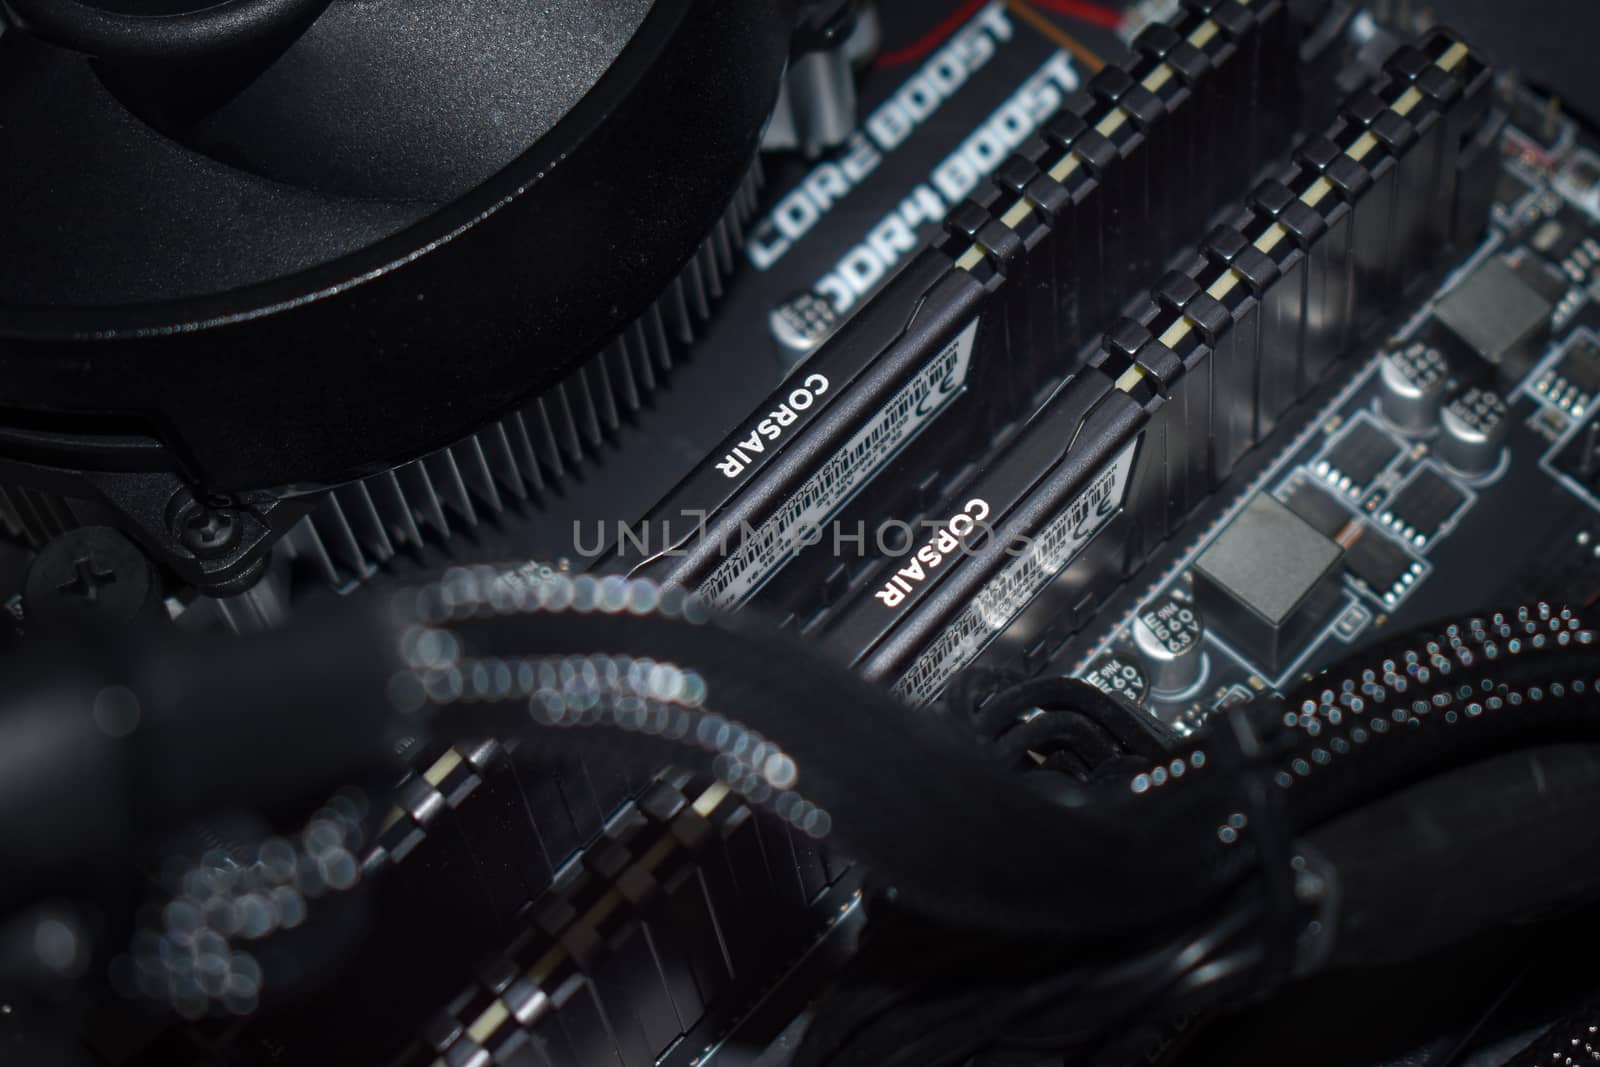 Close up view of Corsair 3200mhz Ram in a gaming pc